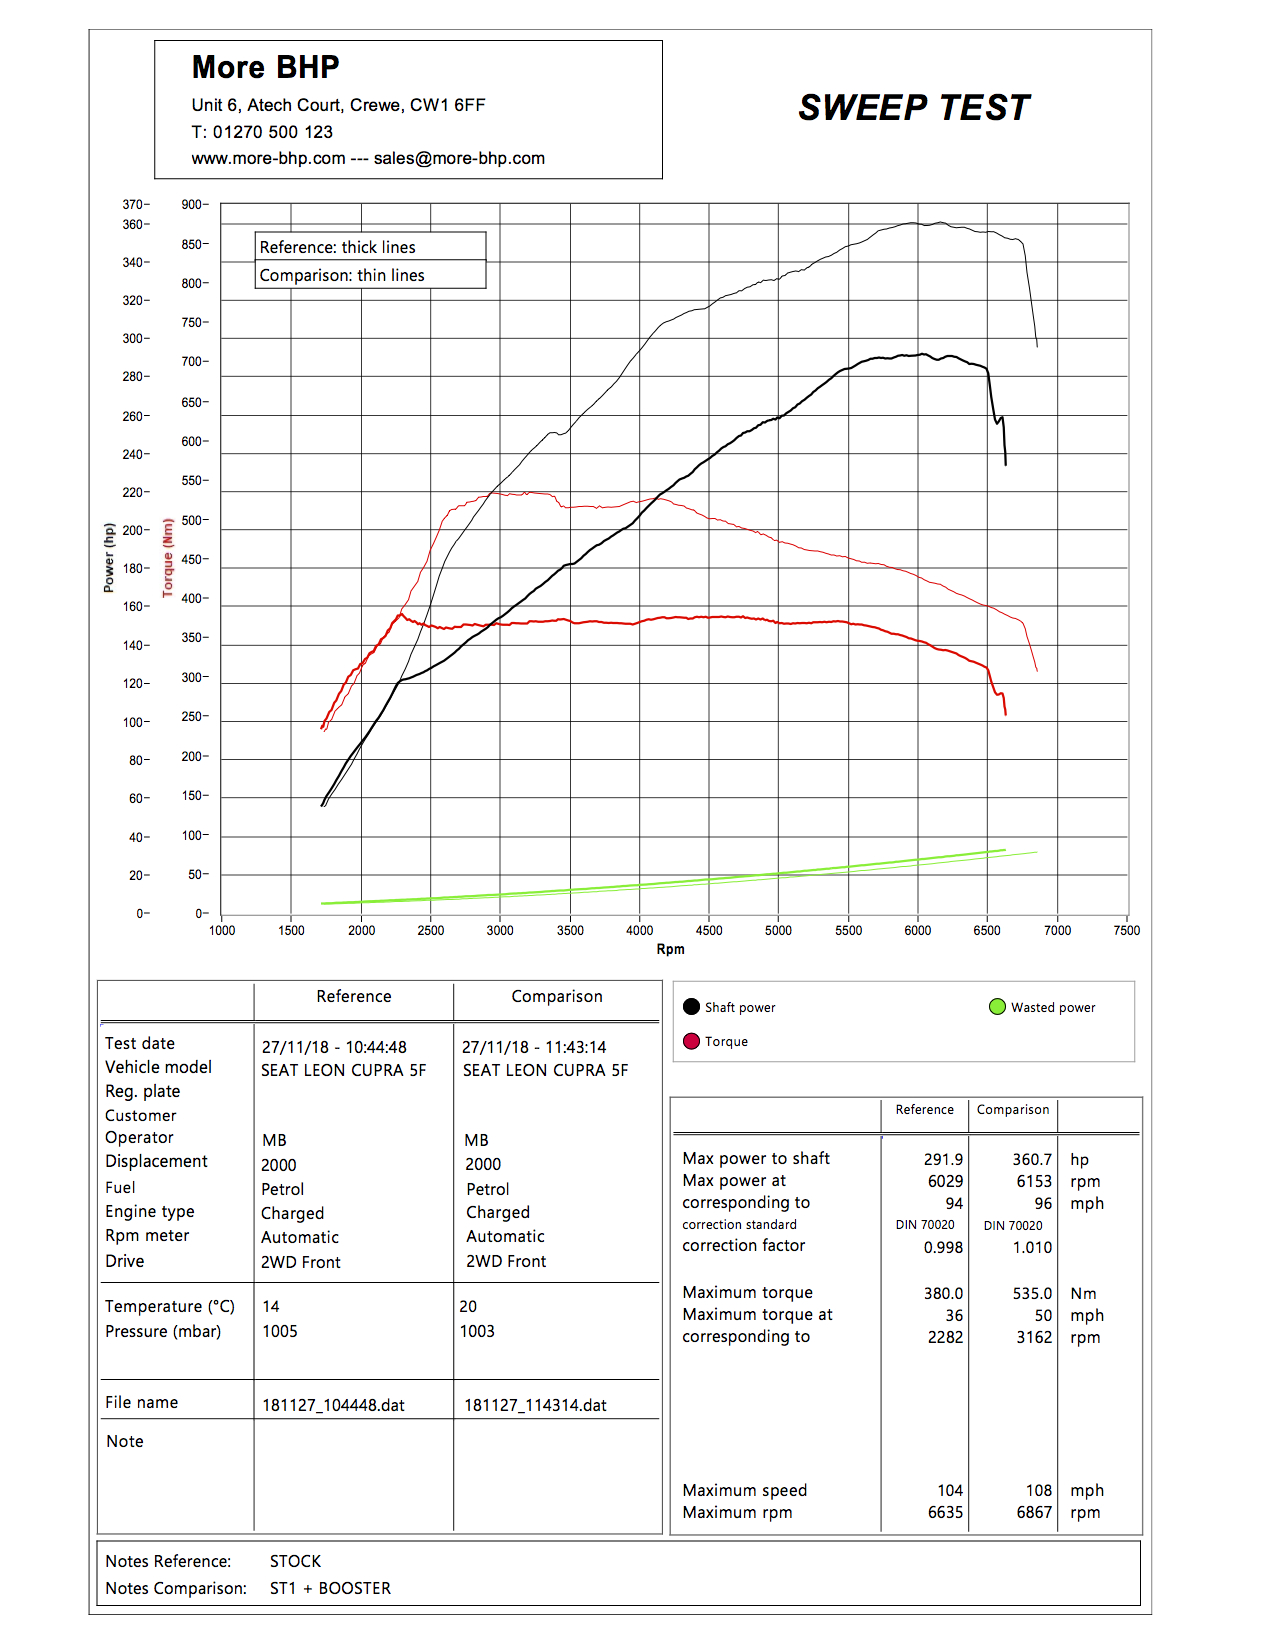 Example Rolling Road printout from the Bapro dyno showing results of a remapped Leon Cupra 280 done at MoreBHP in Crewe